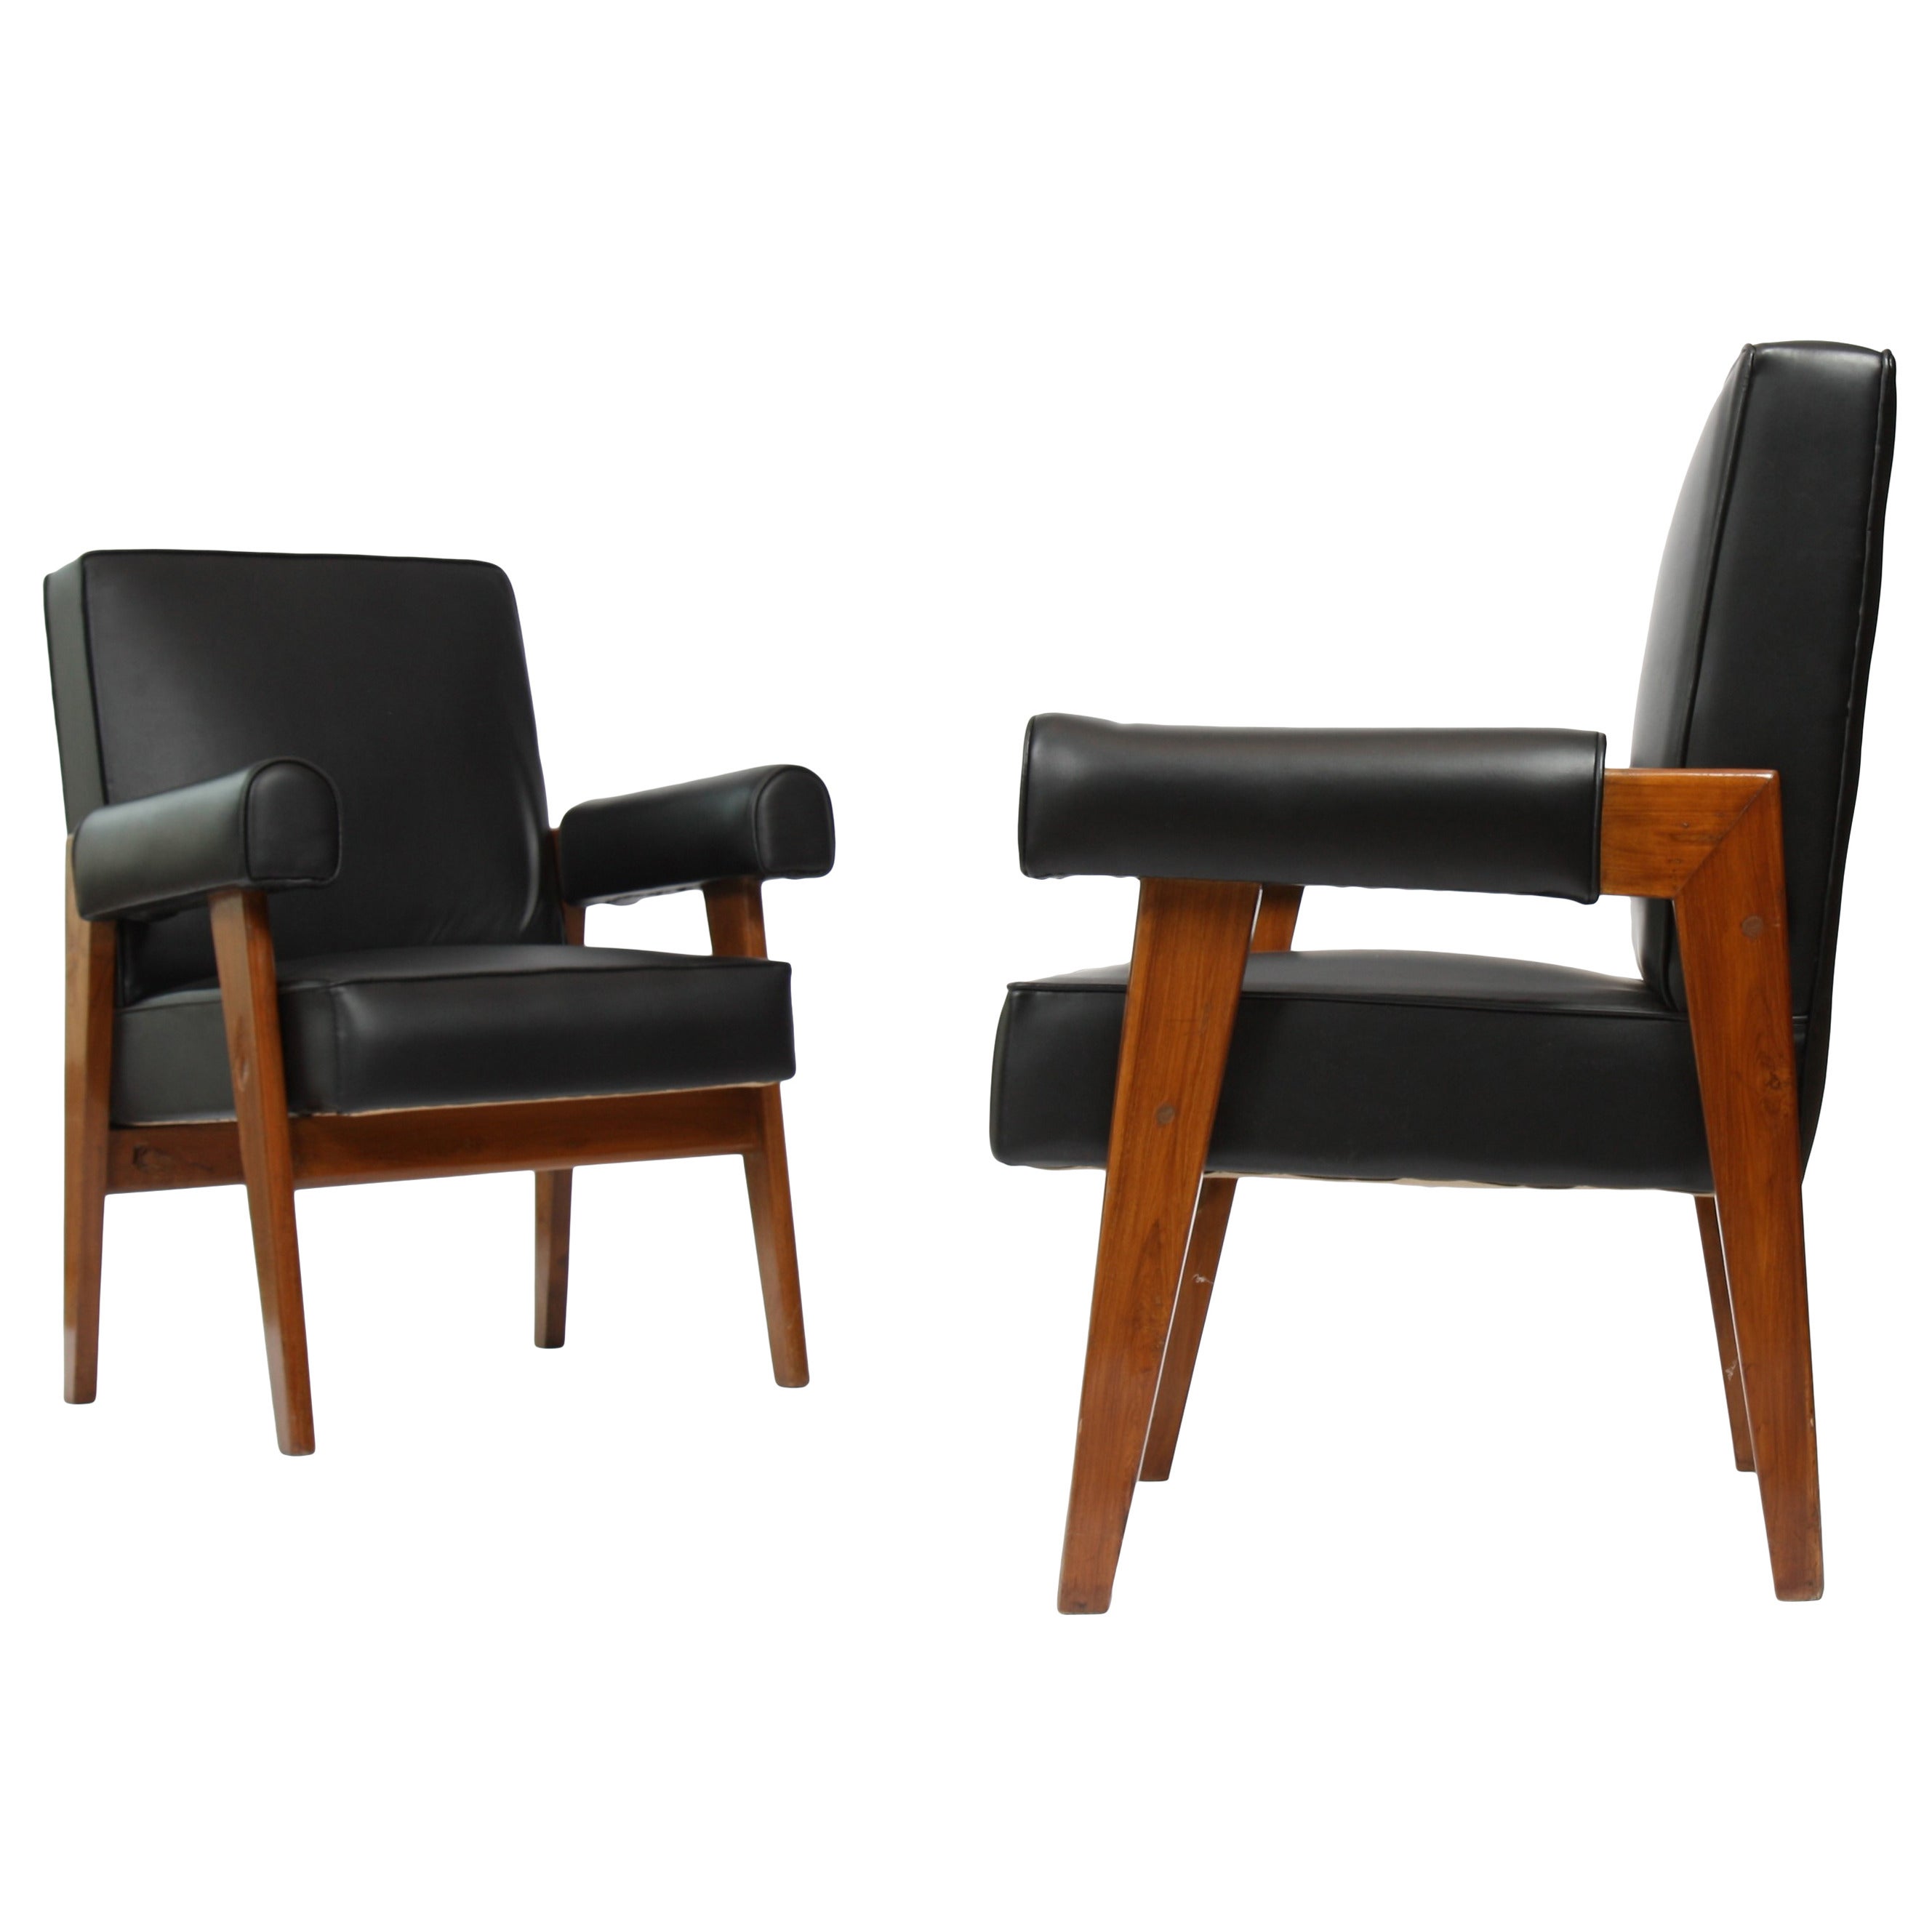 Set of Two "Avocat" Armchairs by Pierre Jeanneret